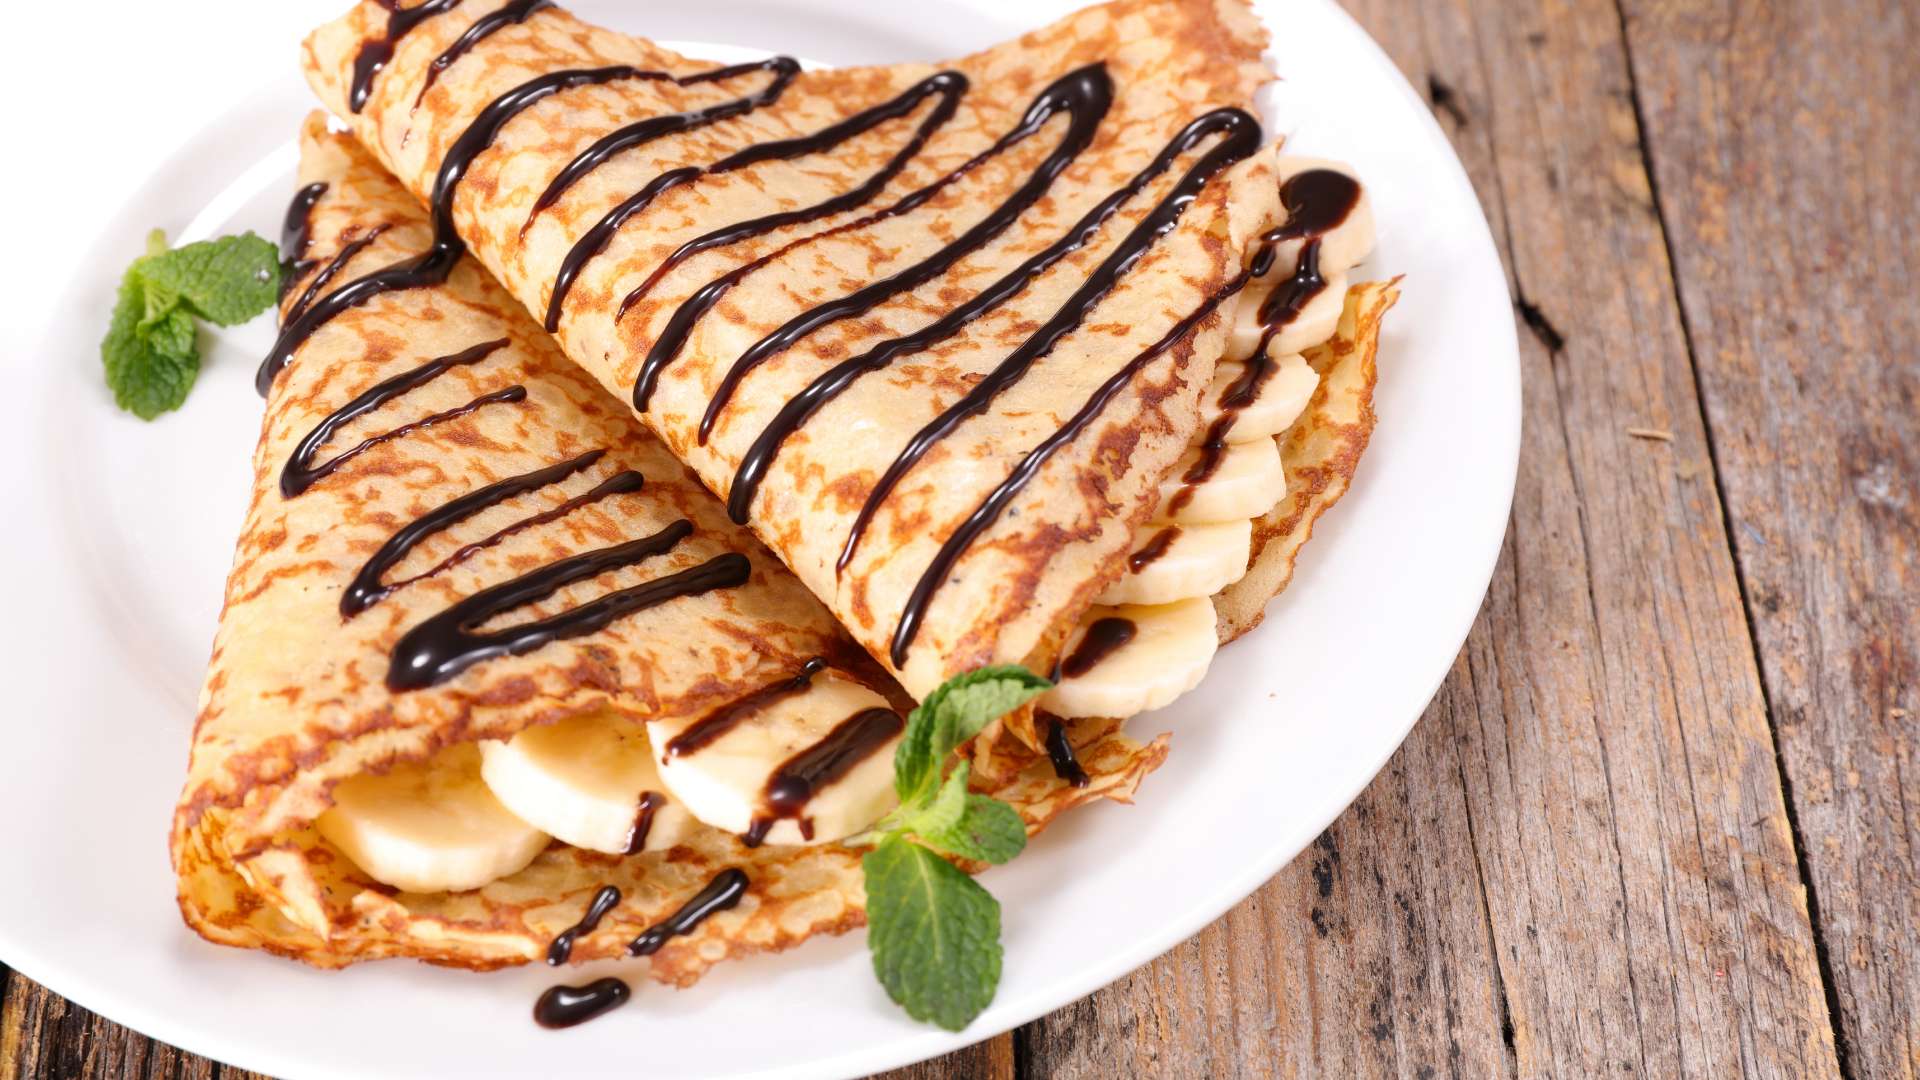 Crepes filled with banana drizzled with chocolate